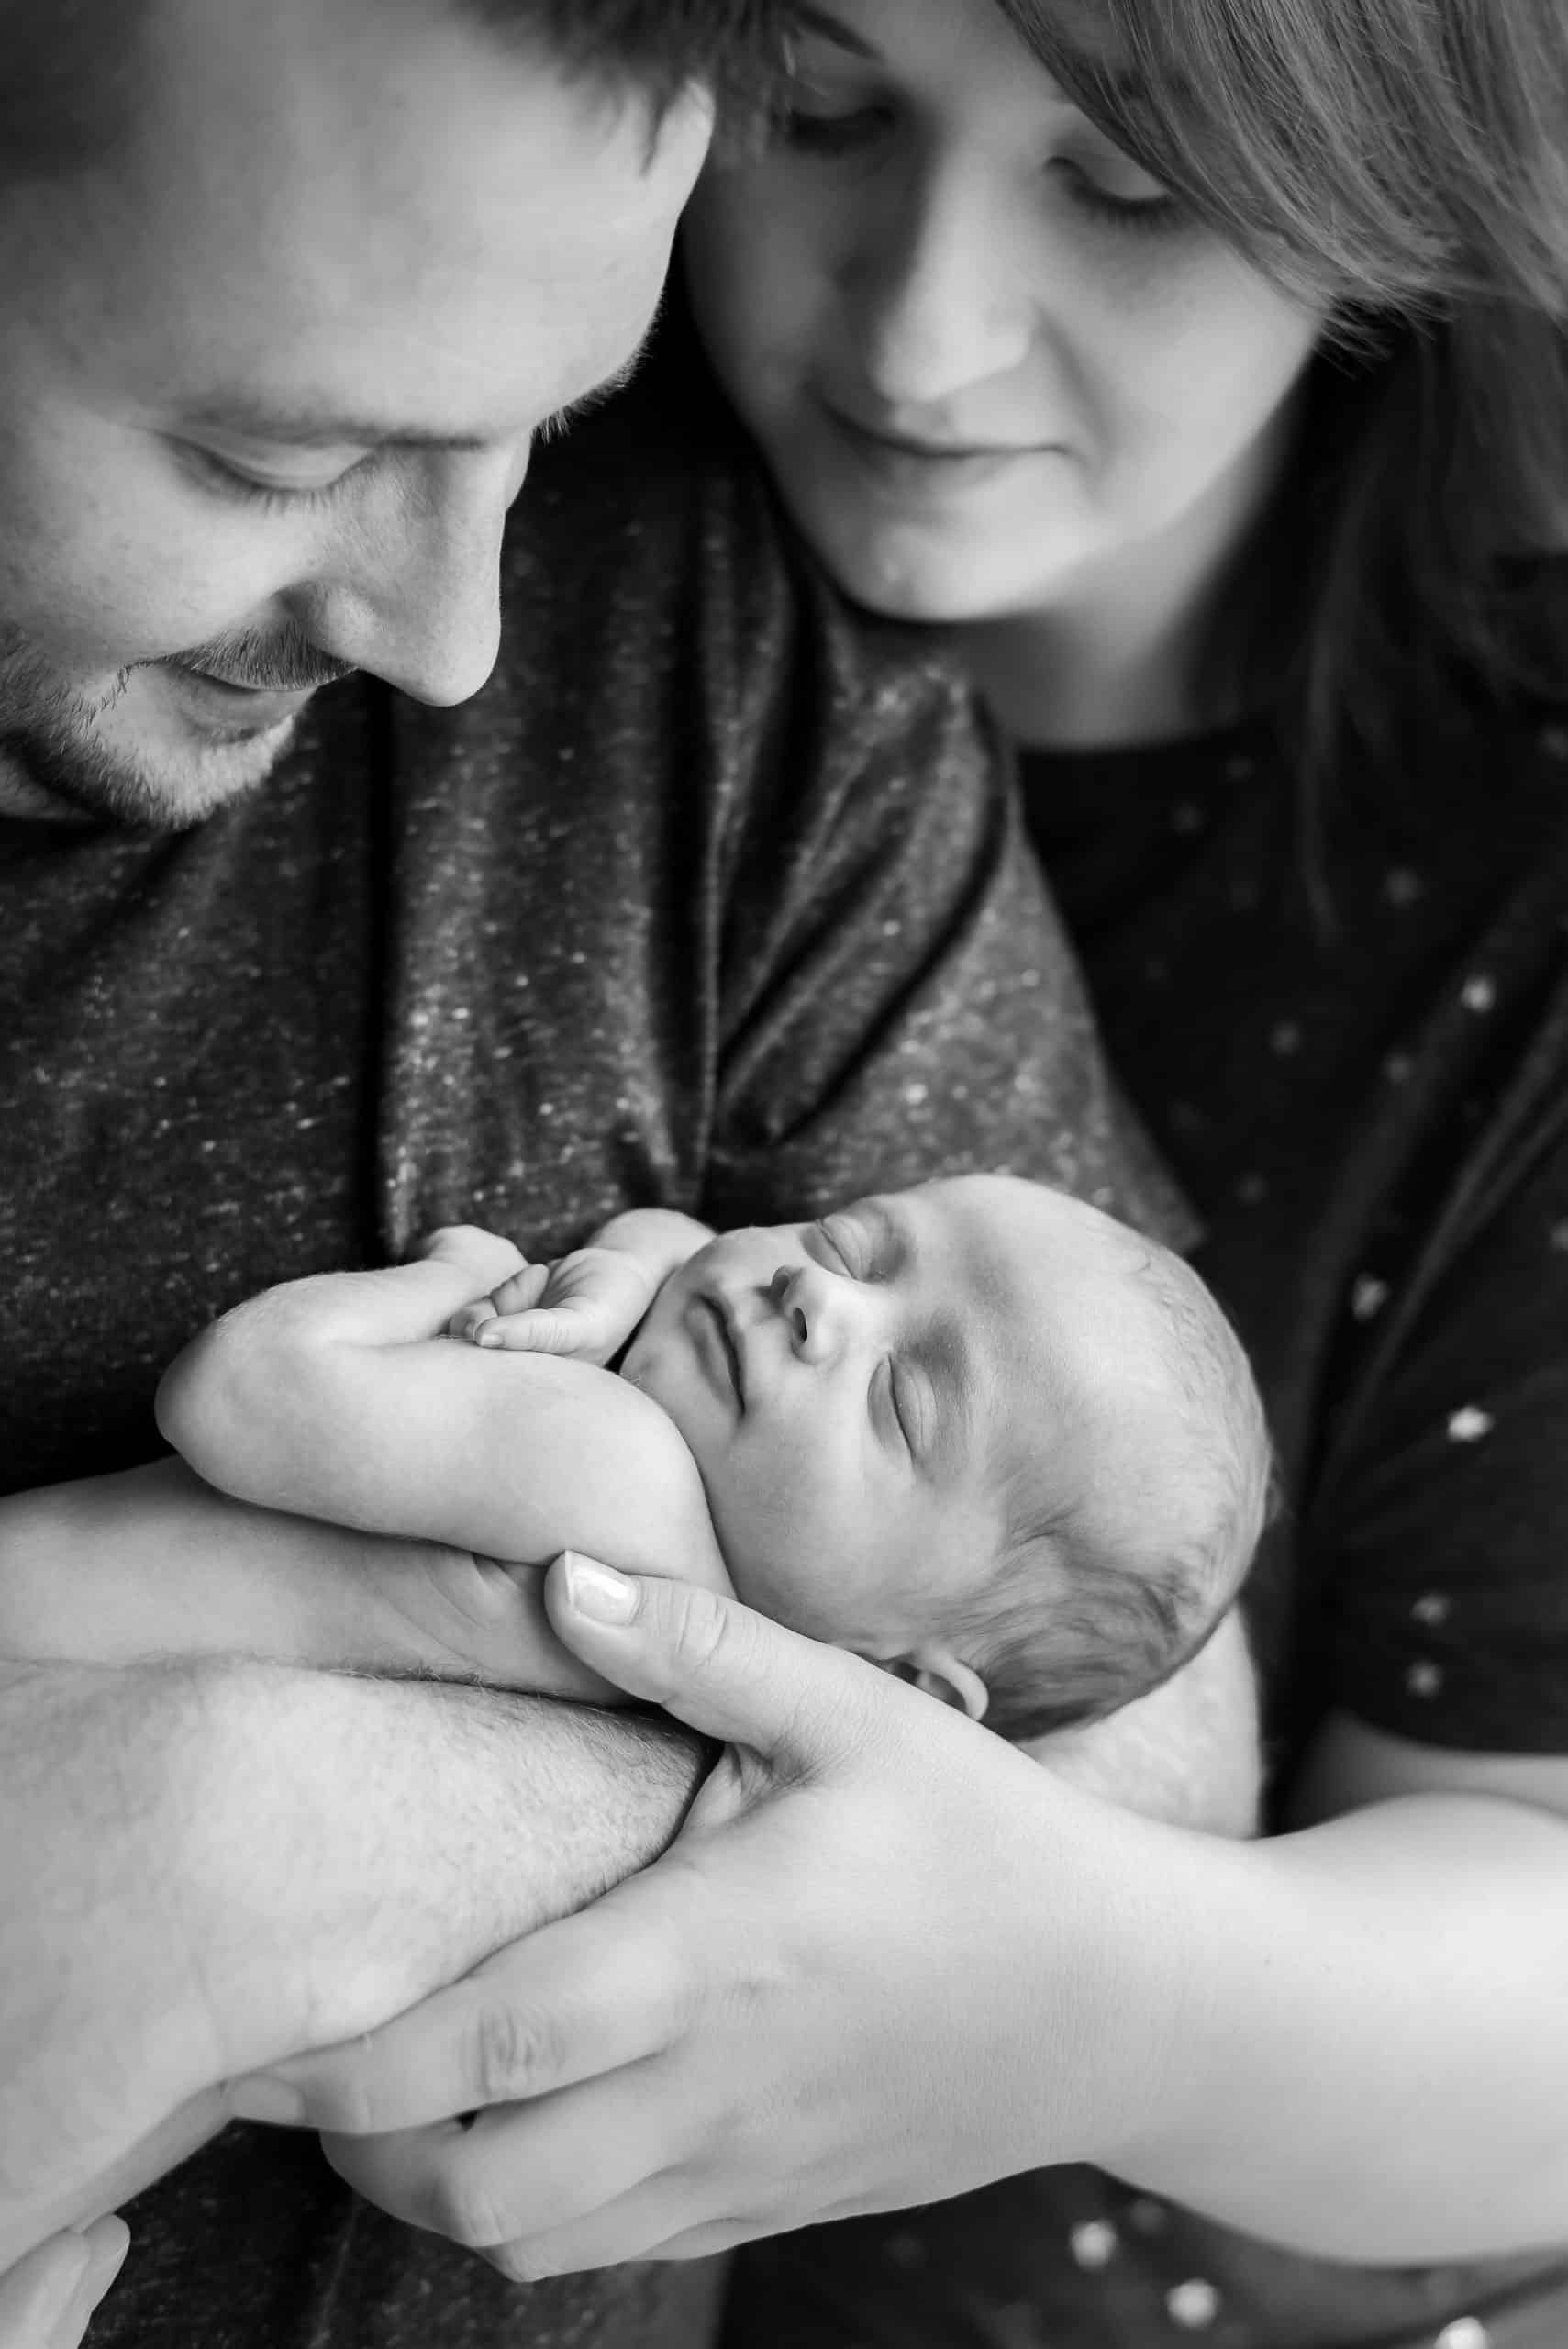 black and white photo on newborn baby and mum and dad for their newbron baby photoshoot. Dad is holding the baby and mum has her arm around them